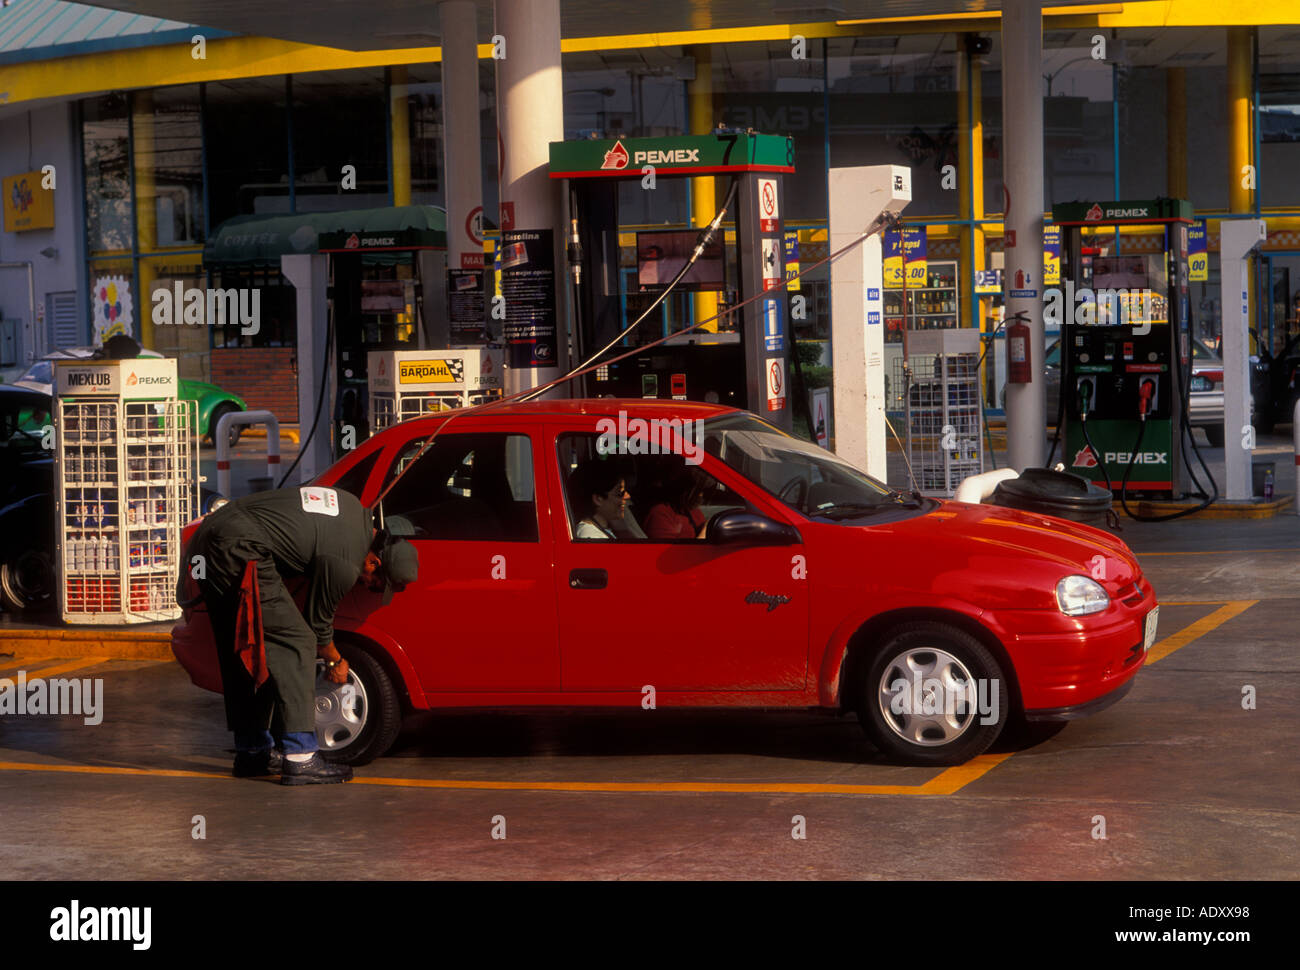 Mexican man, gas station attendant, checking tire pressure, filling gas tank, Pemex gas station, gas station, Mexico City, Federal District, Mexico Stock Photo